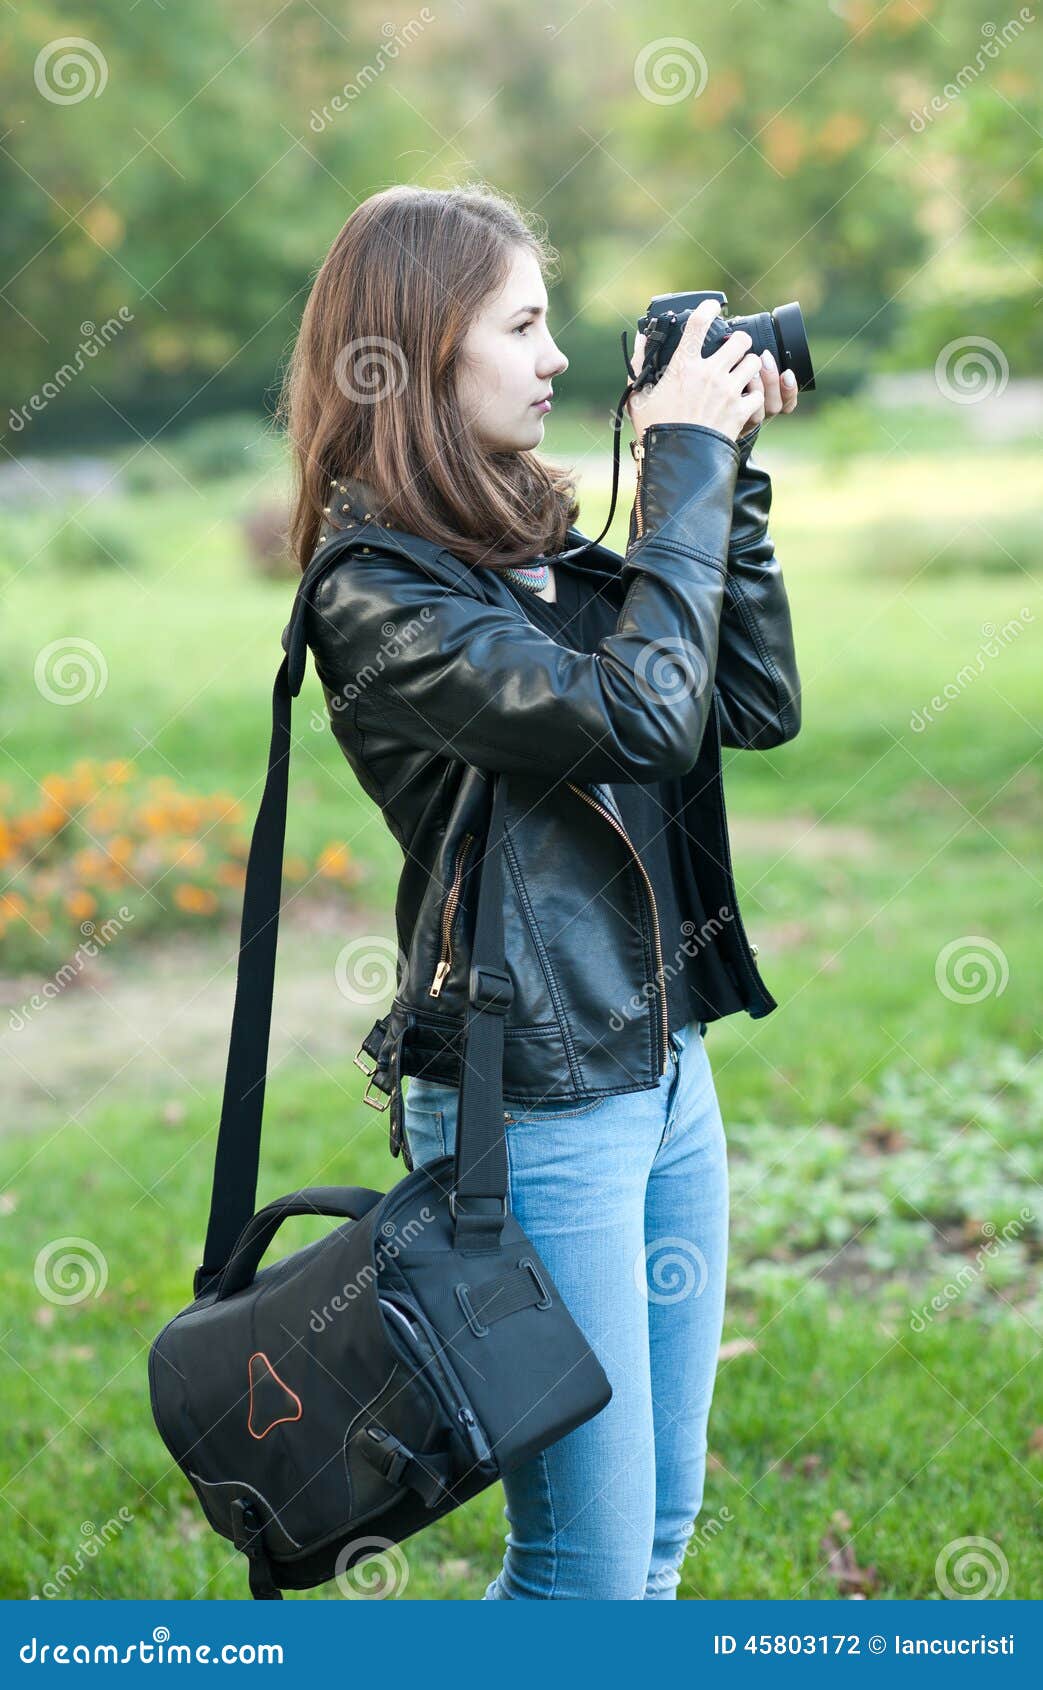 Attractive Young Girl Taking Pictures Outdoors. Cute 